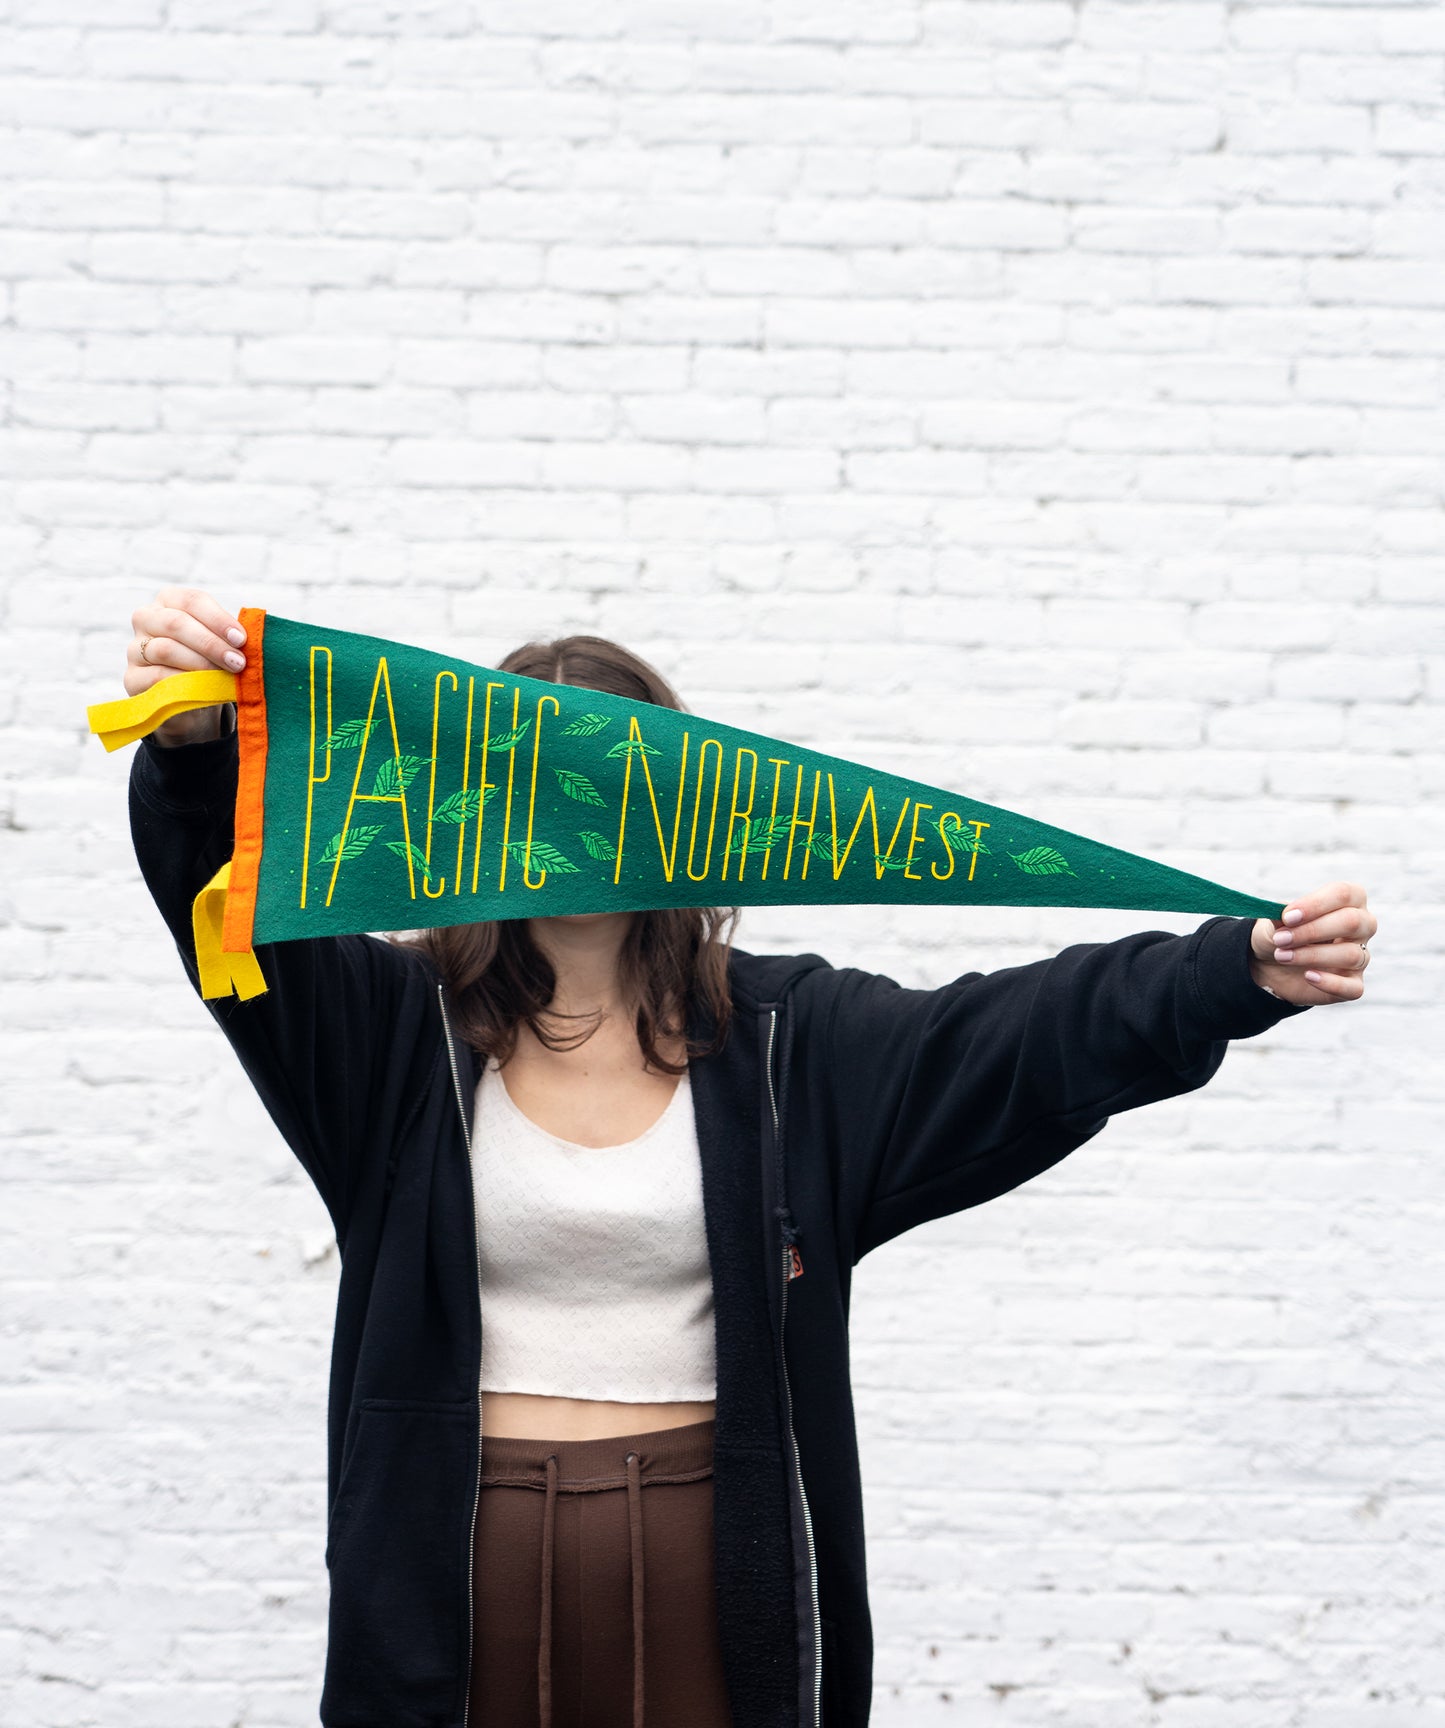 Pacific Northwest Pennant • Invisible Creature x Oxford Pennant x Freeman